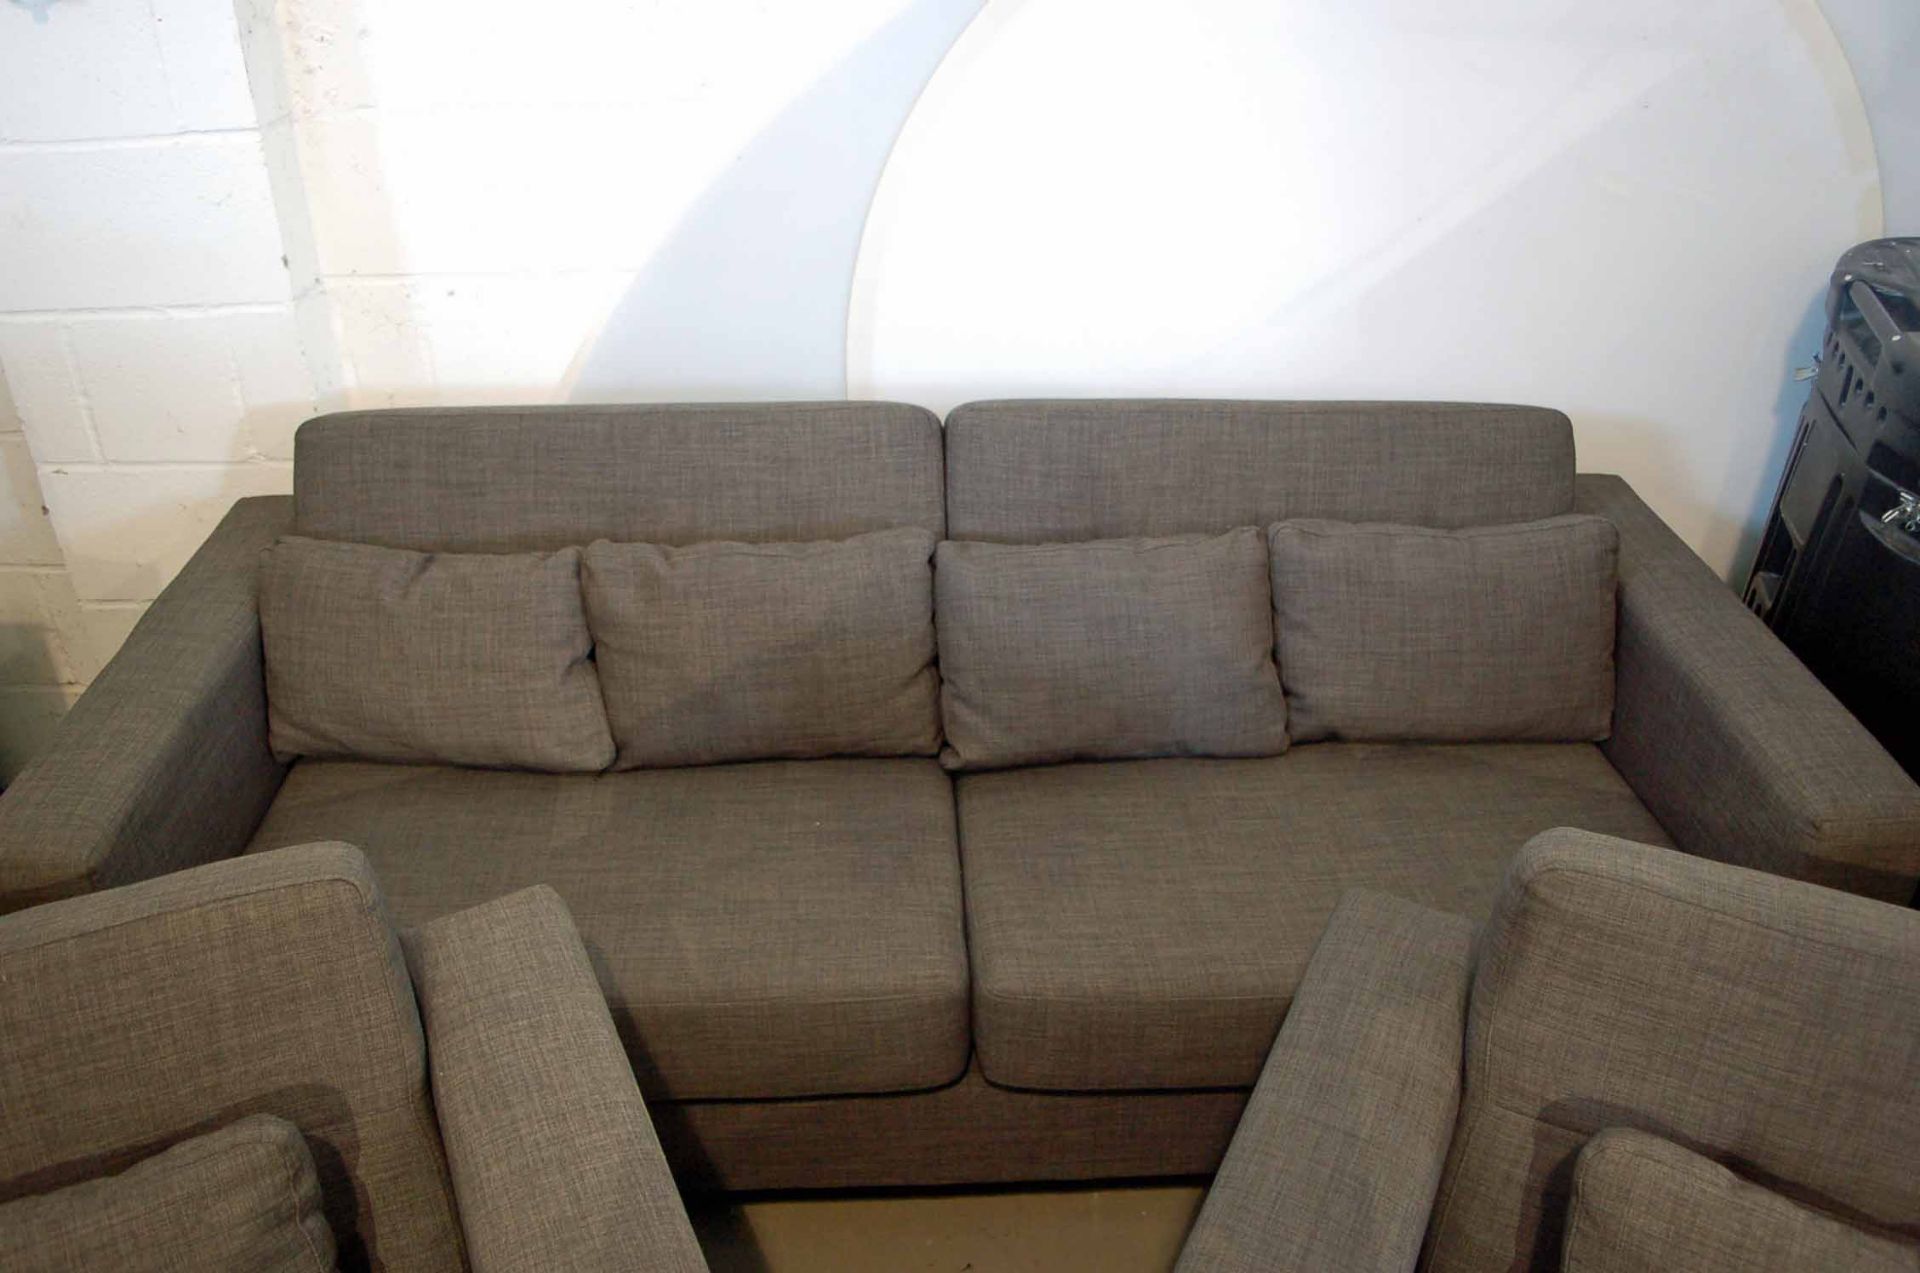 A Charcoal Fabric Upholstered Slab Ended Reception Seating Set comprising Two Armchairs and matching - Image 2 of 4